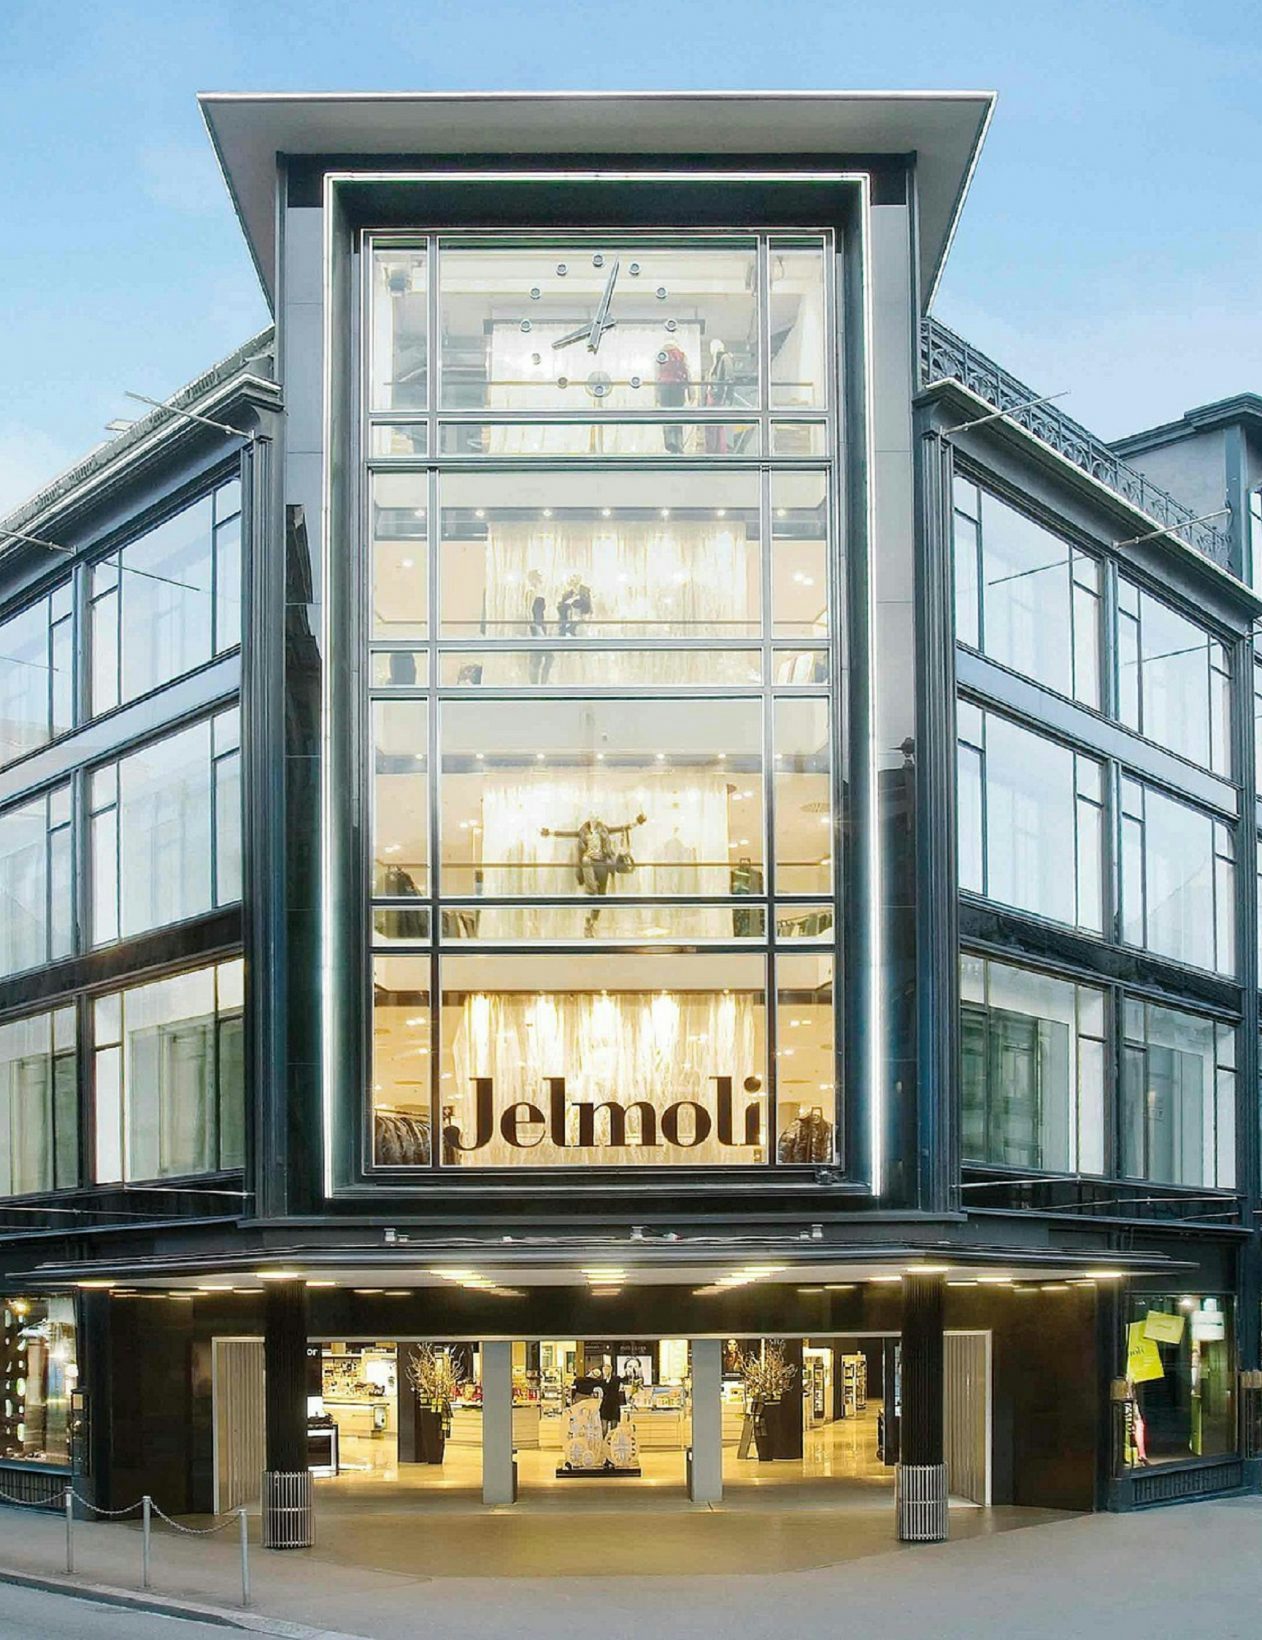 Repositionning of the Jelmoli building in Zurich